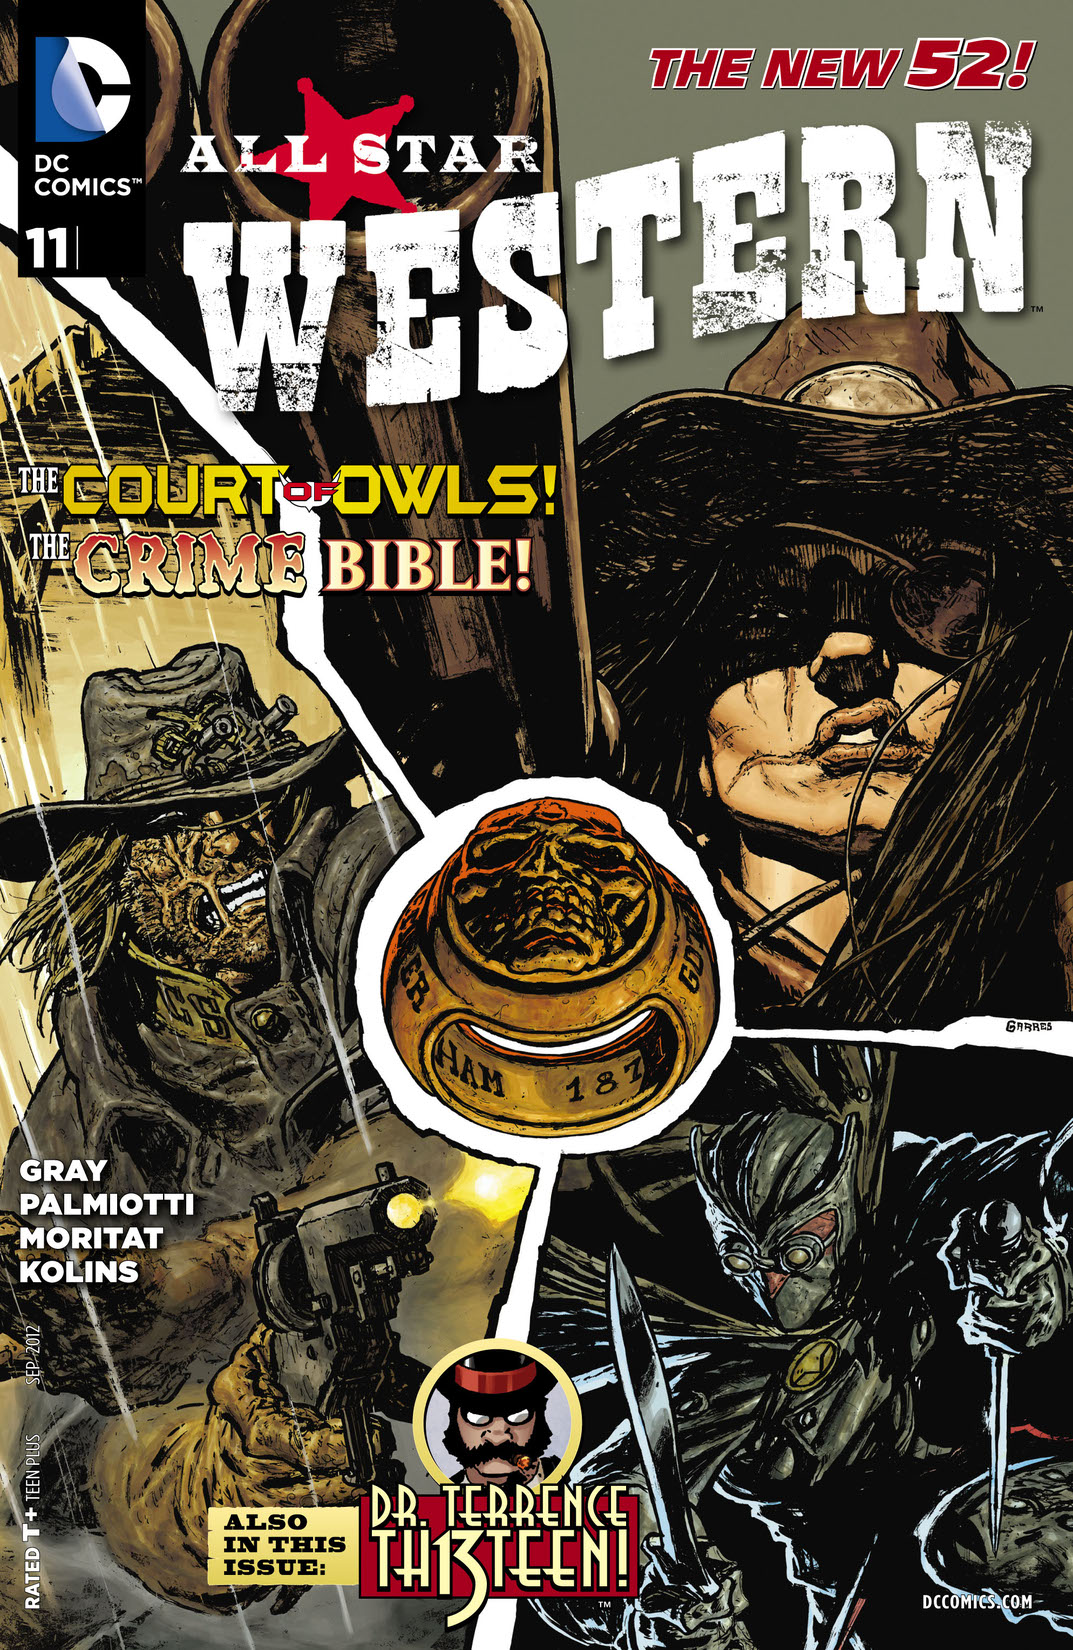 All Star Western #11 preview images